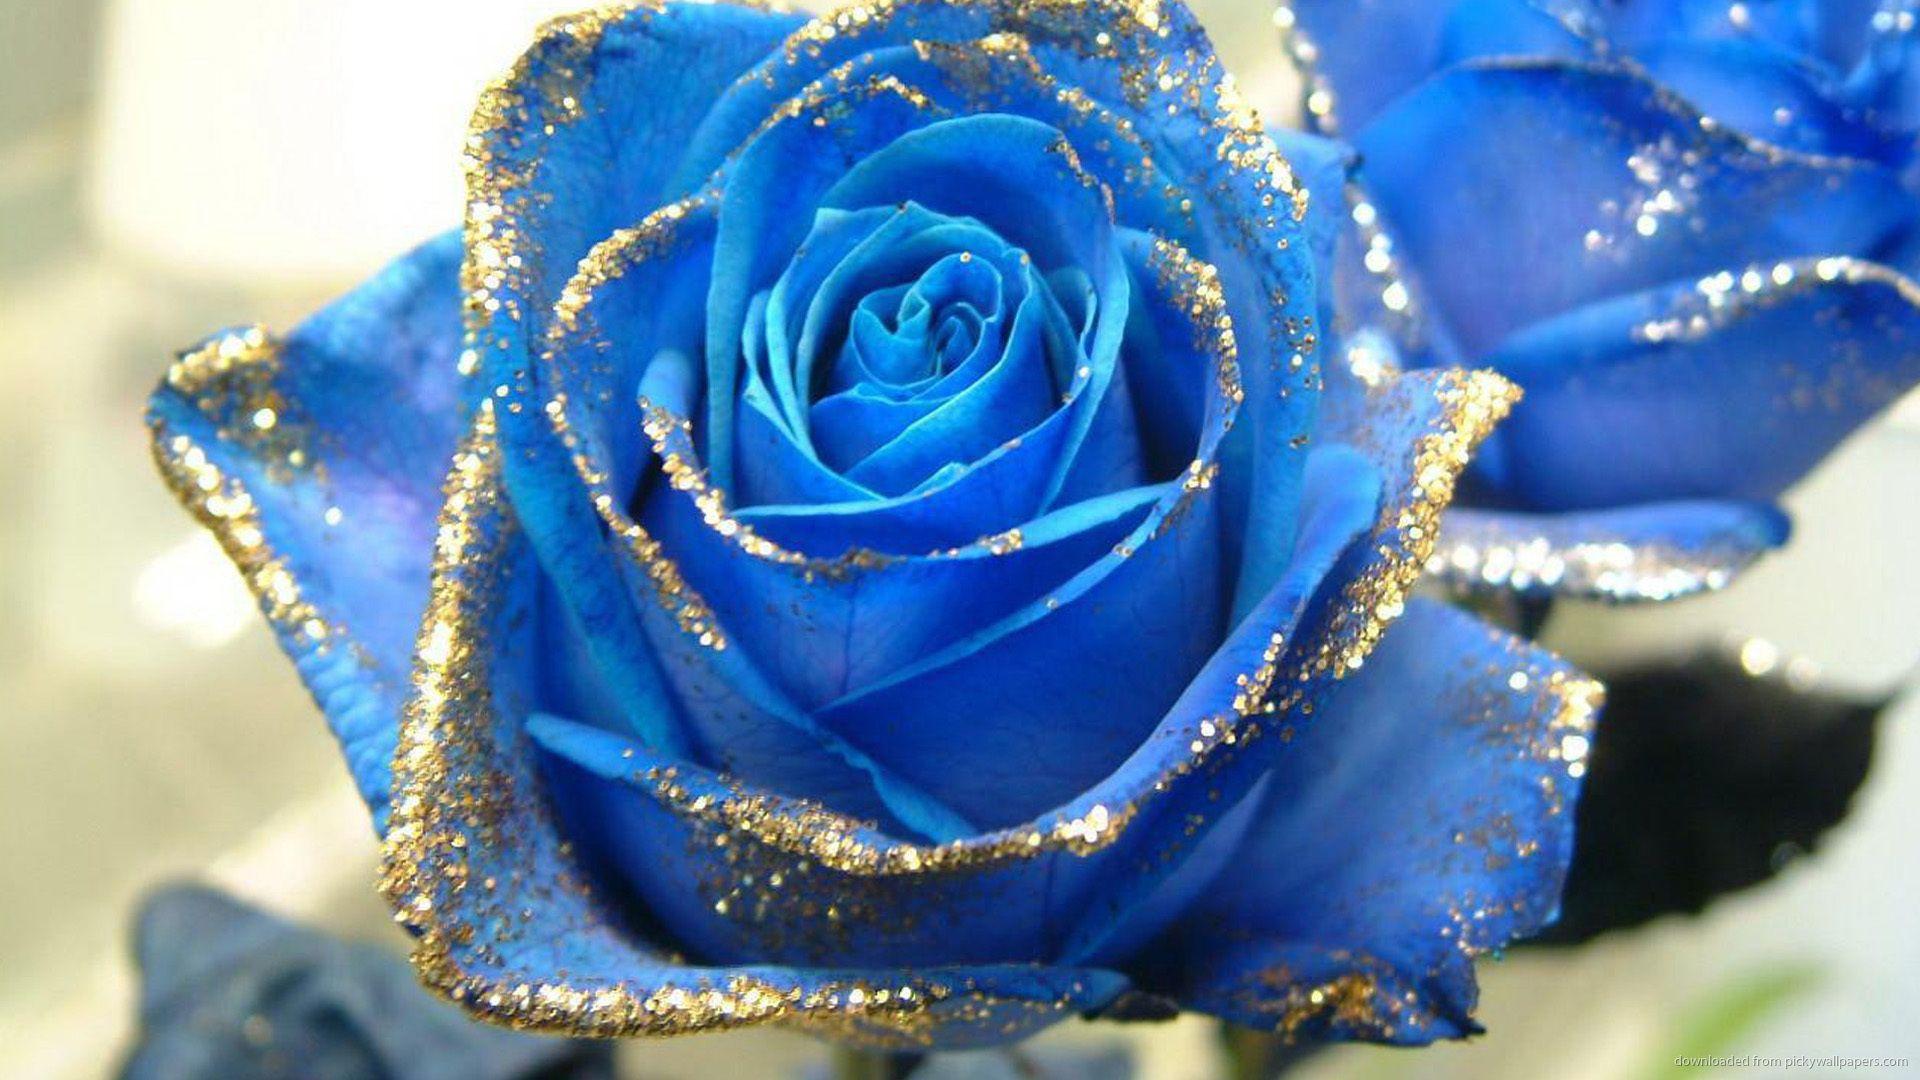 Blue Rose With Gold Glitter Wallpaper Picture For iPhone